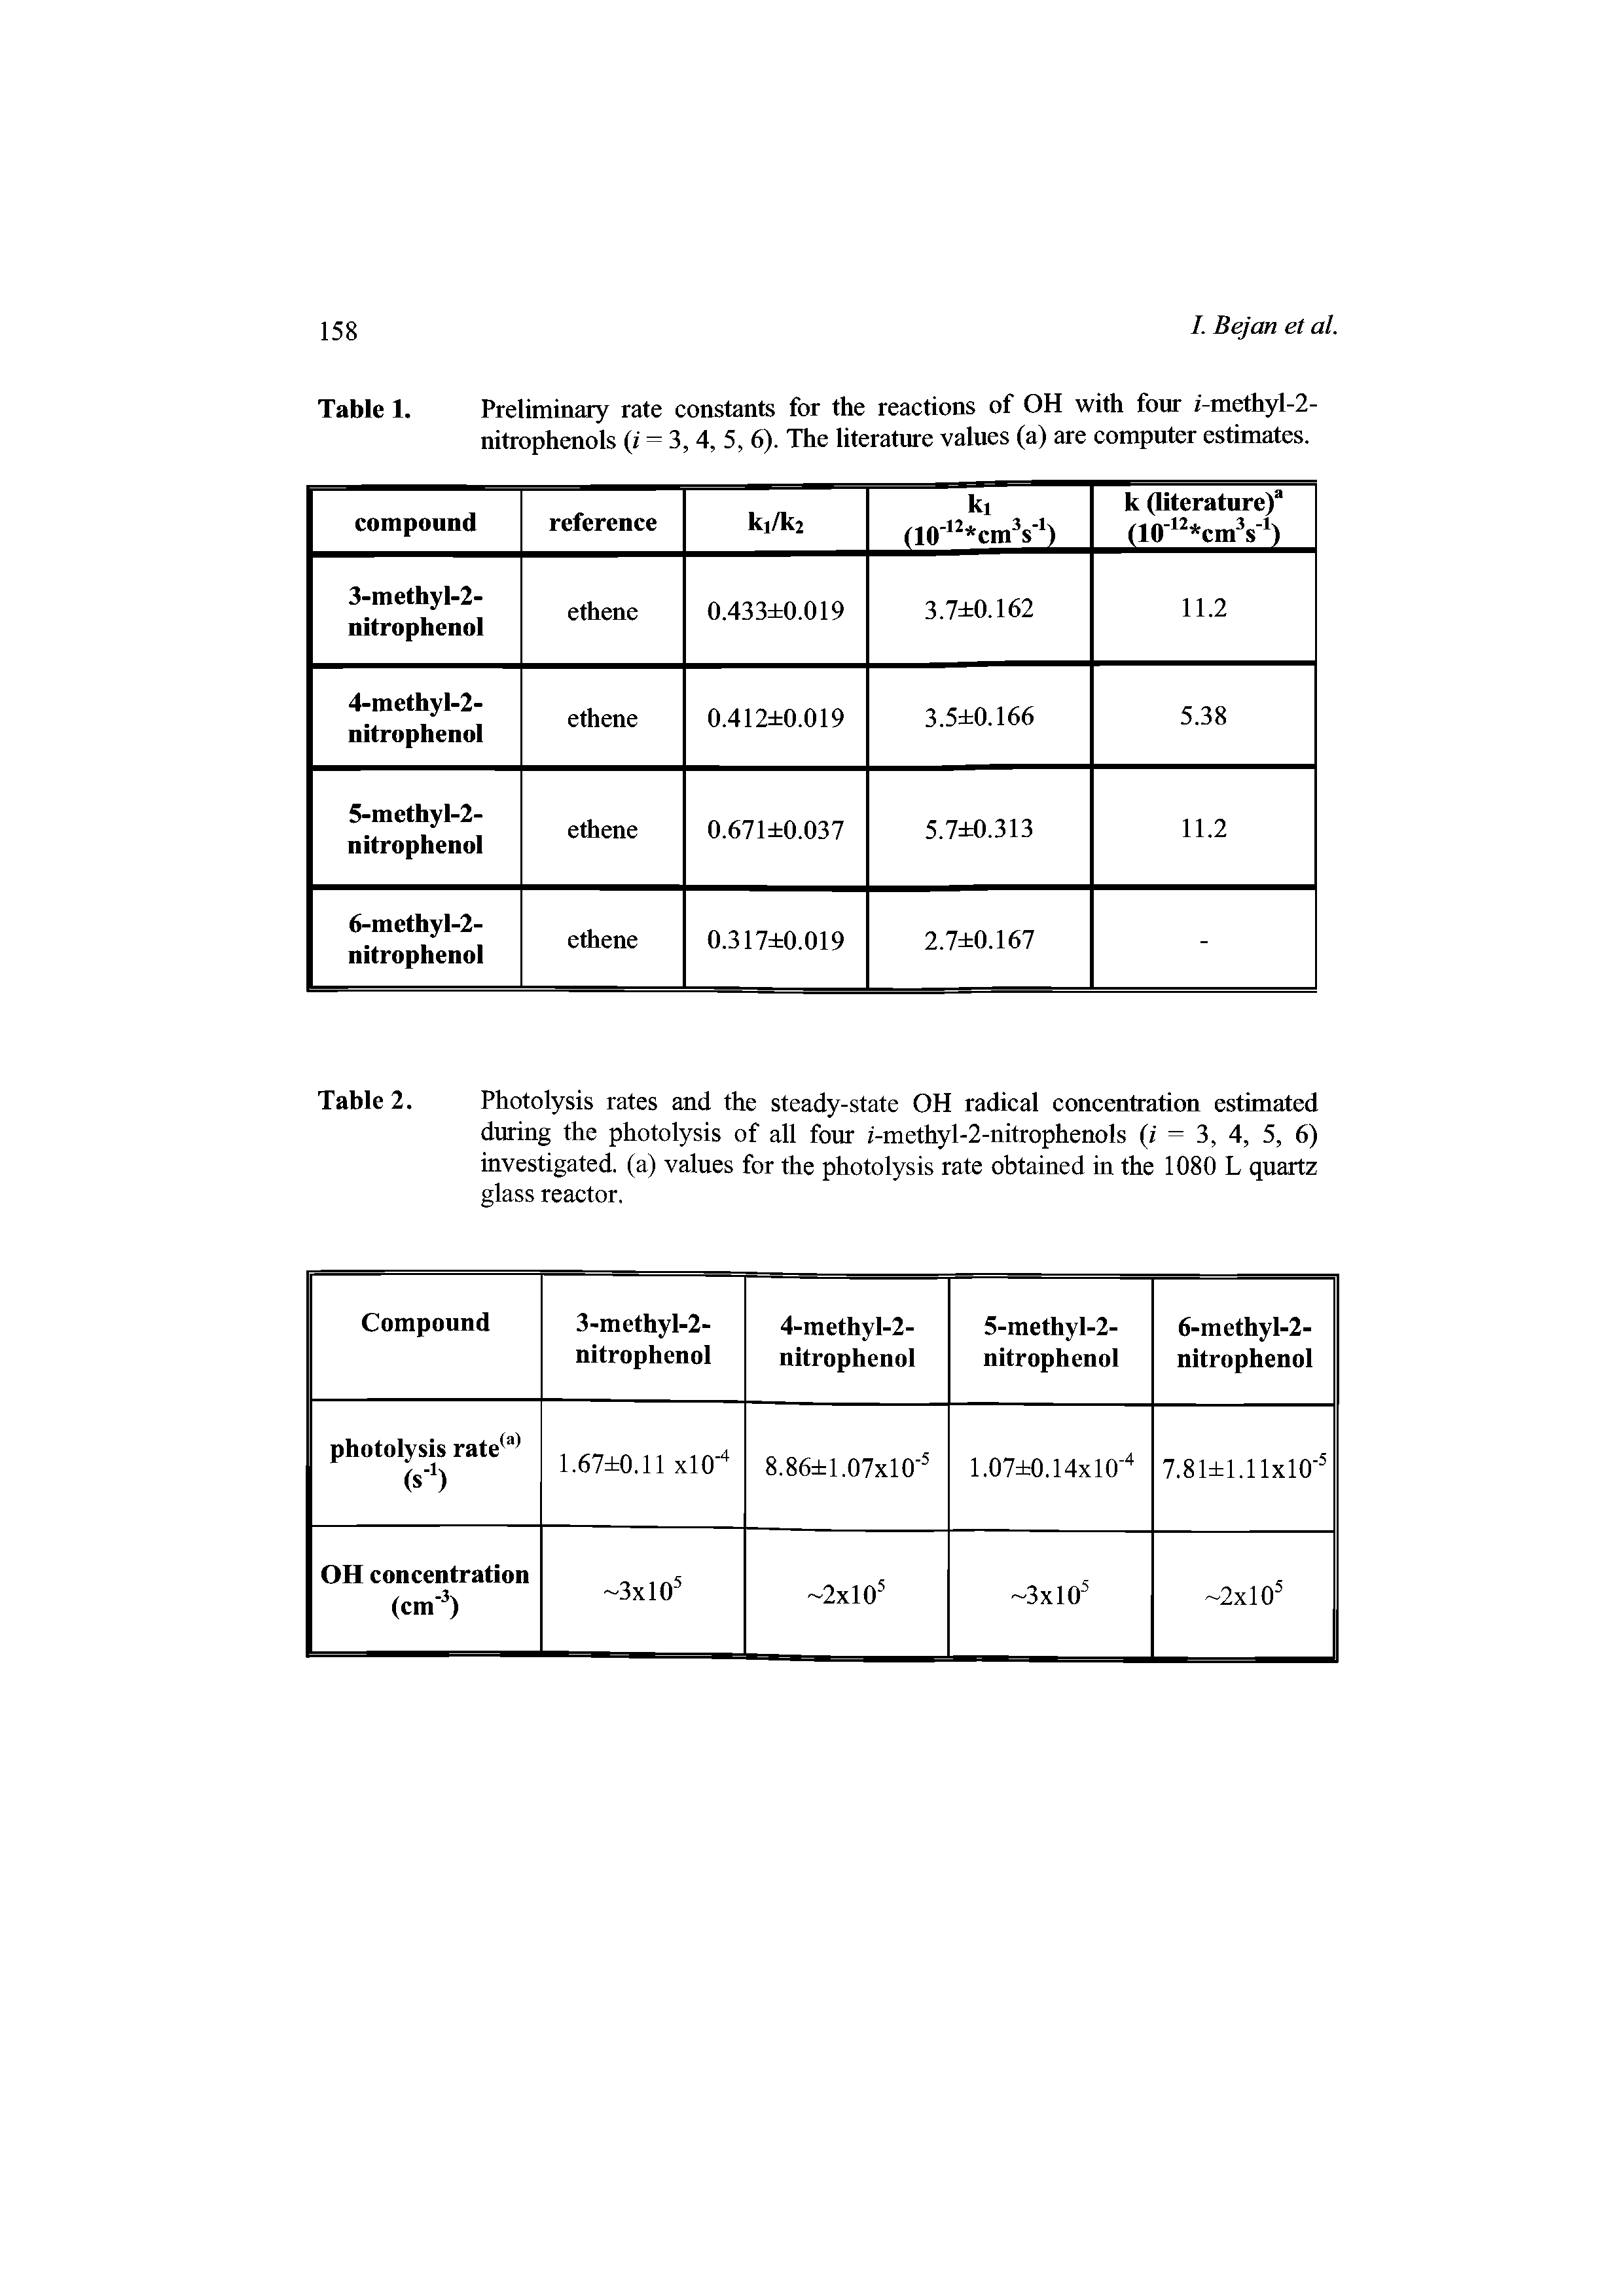 Table 2. Photolysis rates and the steady-state OH radical concentration estimated during the photolysis of all four i-methyl-2-nitrophenoIs (/ = 3, 4, 5, 6) investigated, (a) values for the photolysis rate obtained in the 1080 L quartz glass reactor.